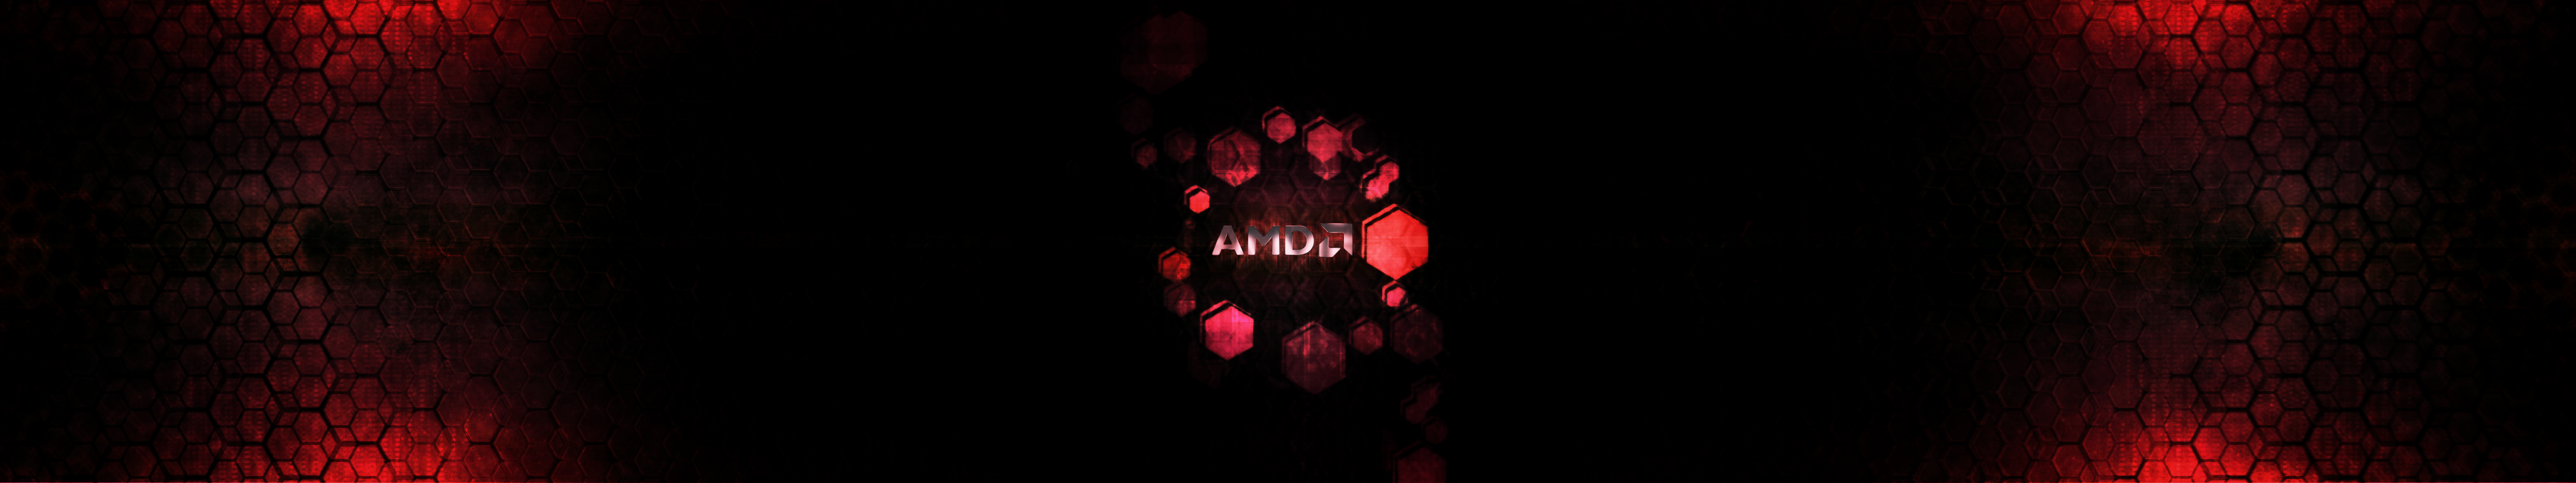 5760X1080 Amd Wallpapers